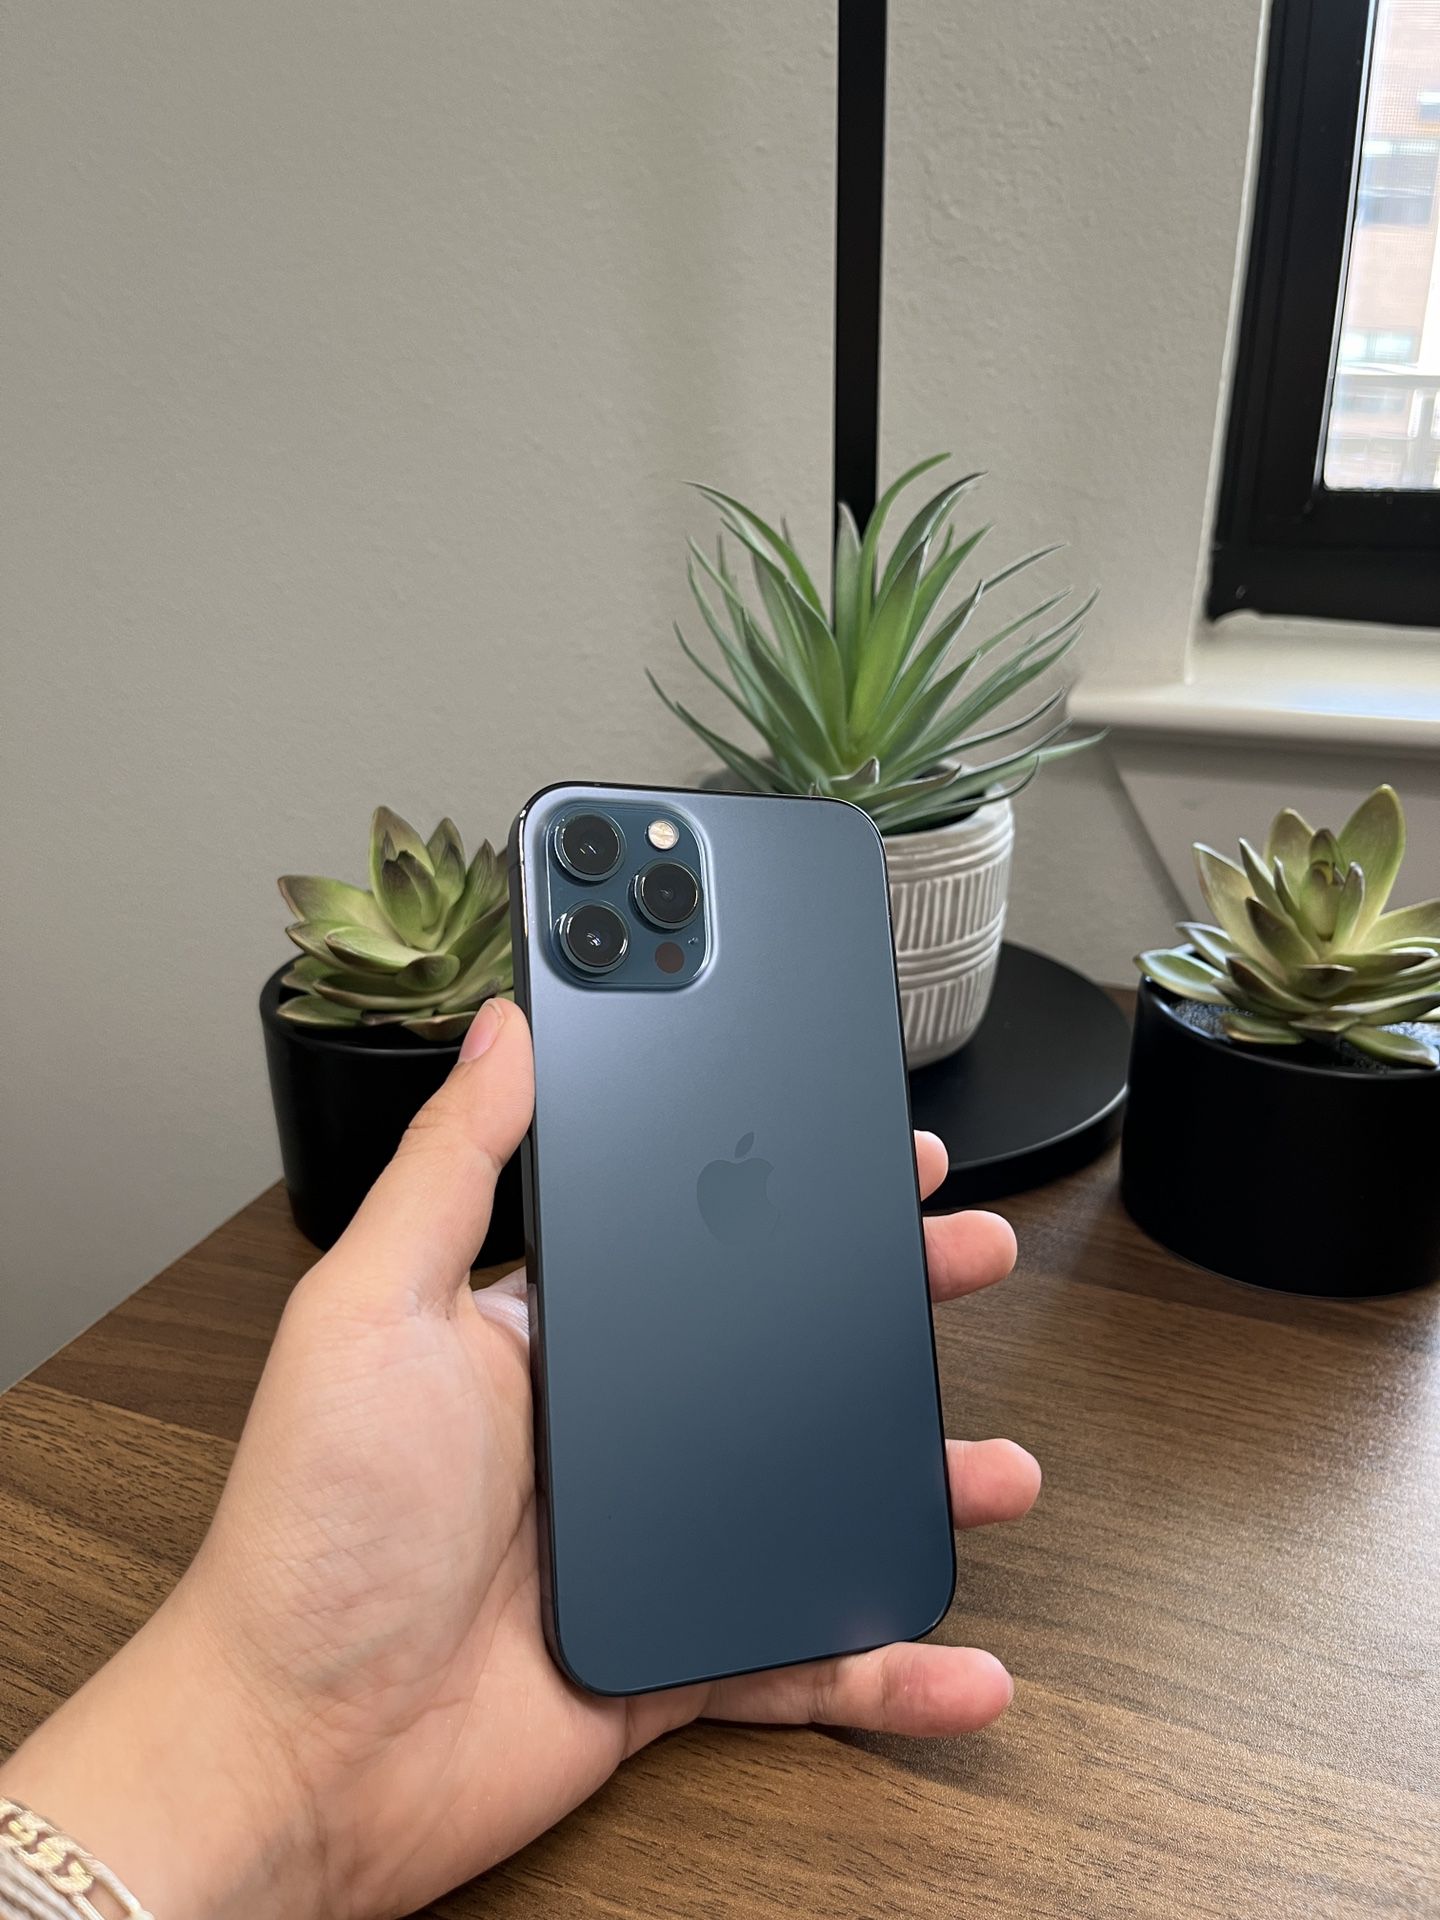 iPhone 12 Pro Max 128gb Pacific Blue 💙⭐️ Unlocked Any Carrier! Verizon AT&T Cricket T-mobile Metro Mexico Tambien 🇲🇽 international